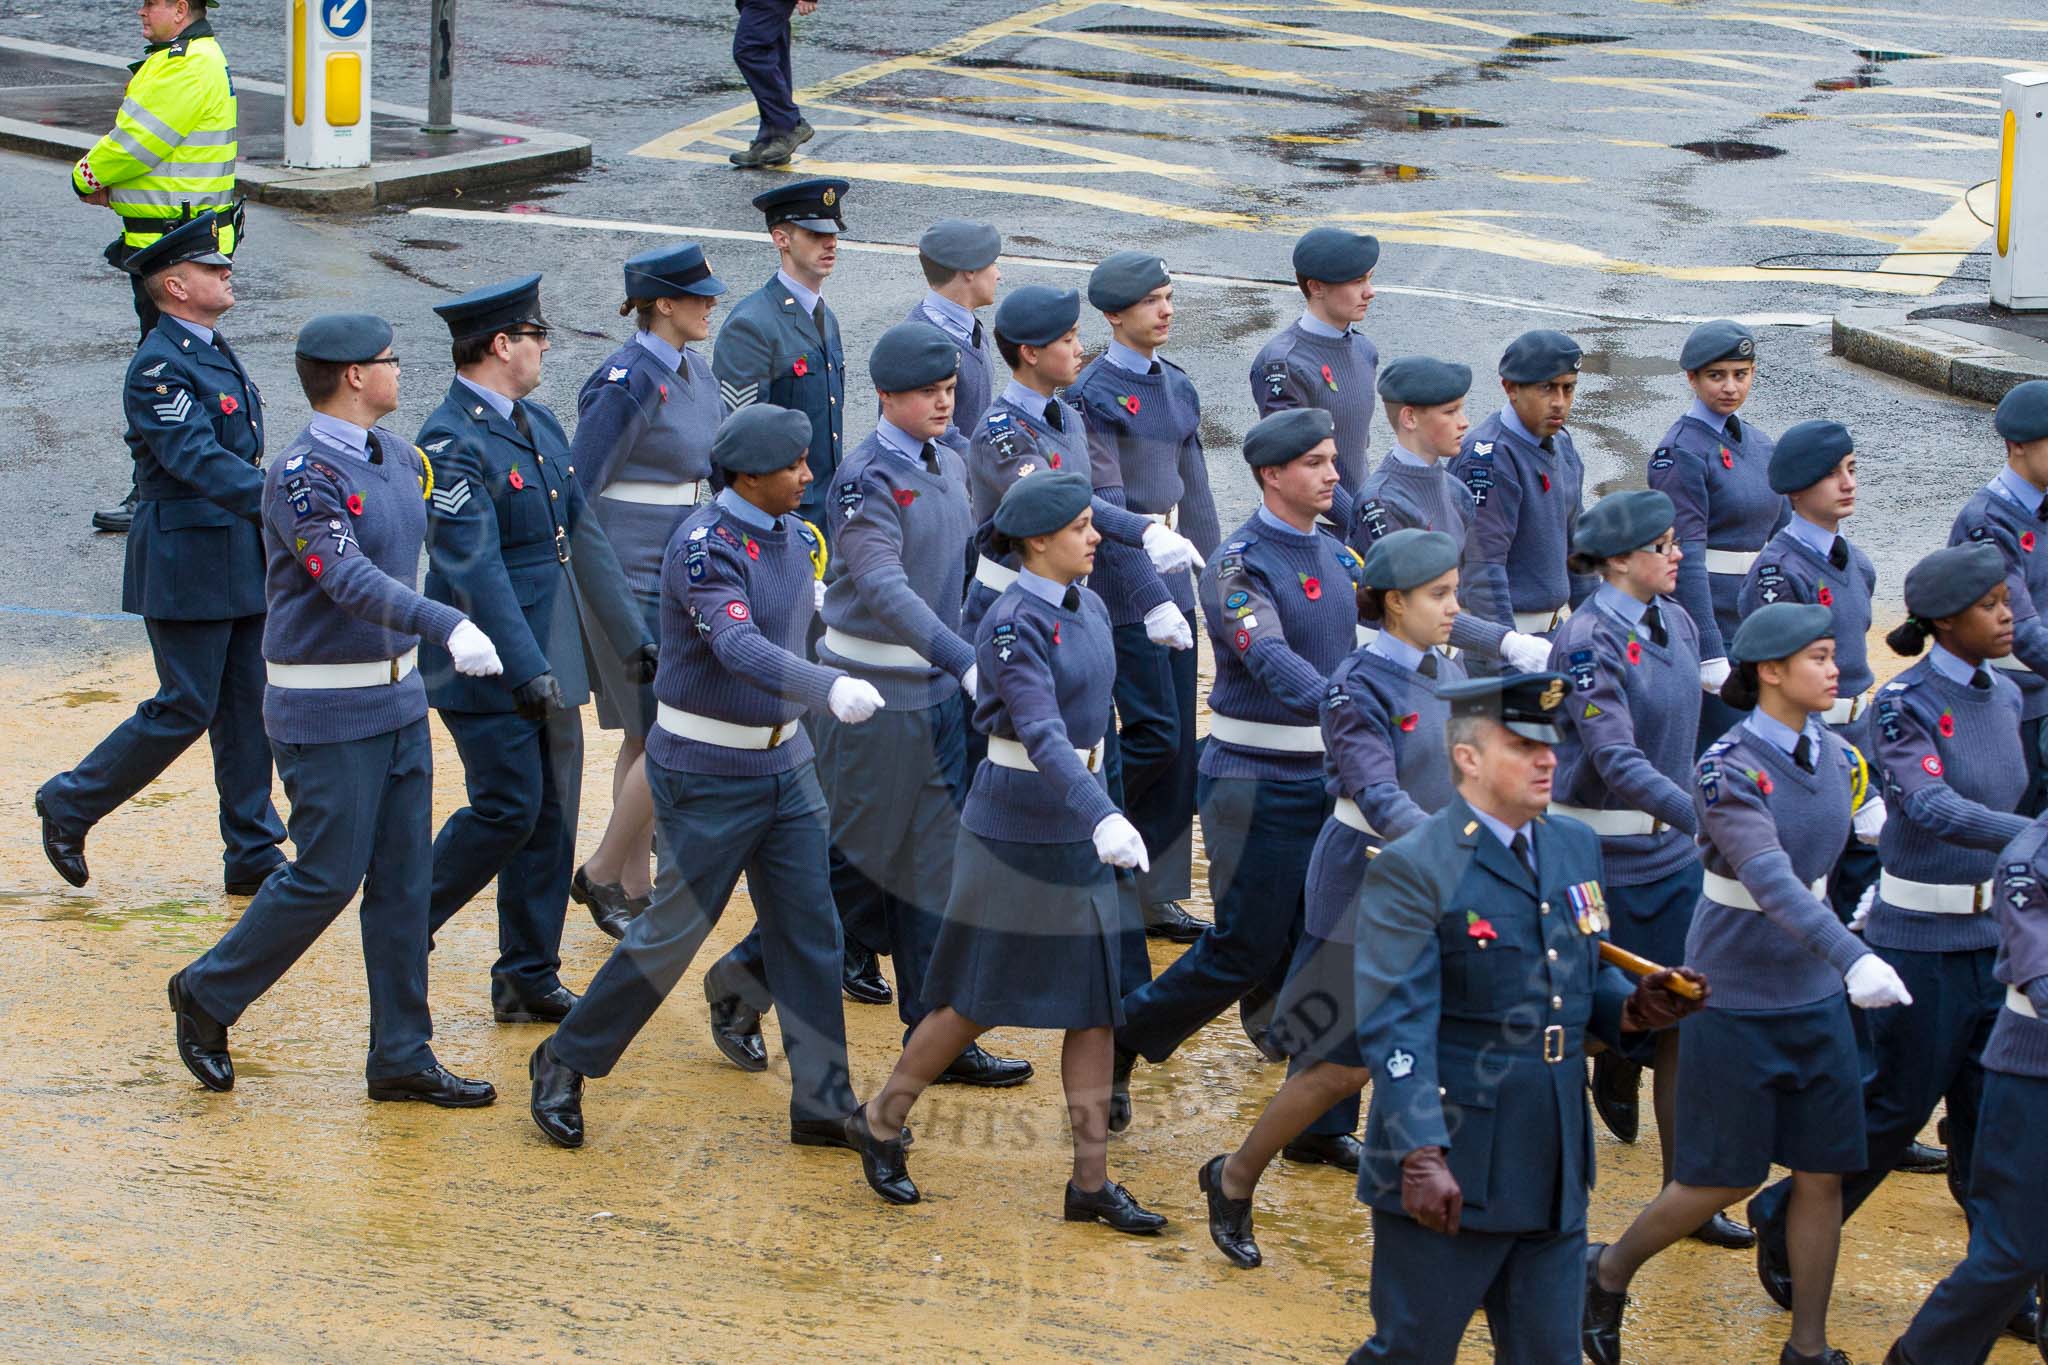 Lord Mayor's Show 2012: Entry 24 - Air Training Corps, the Air Cadets is the world's largest youth air training organisation..
Press stand opposite Mansion House, City of London,
London,
Greater London,
United Kingdom,
on 10 November 2012 at 11:11, image #417